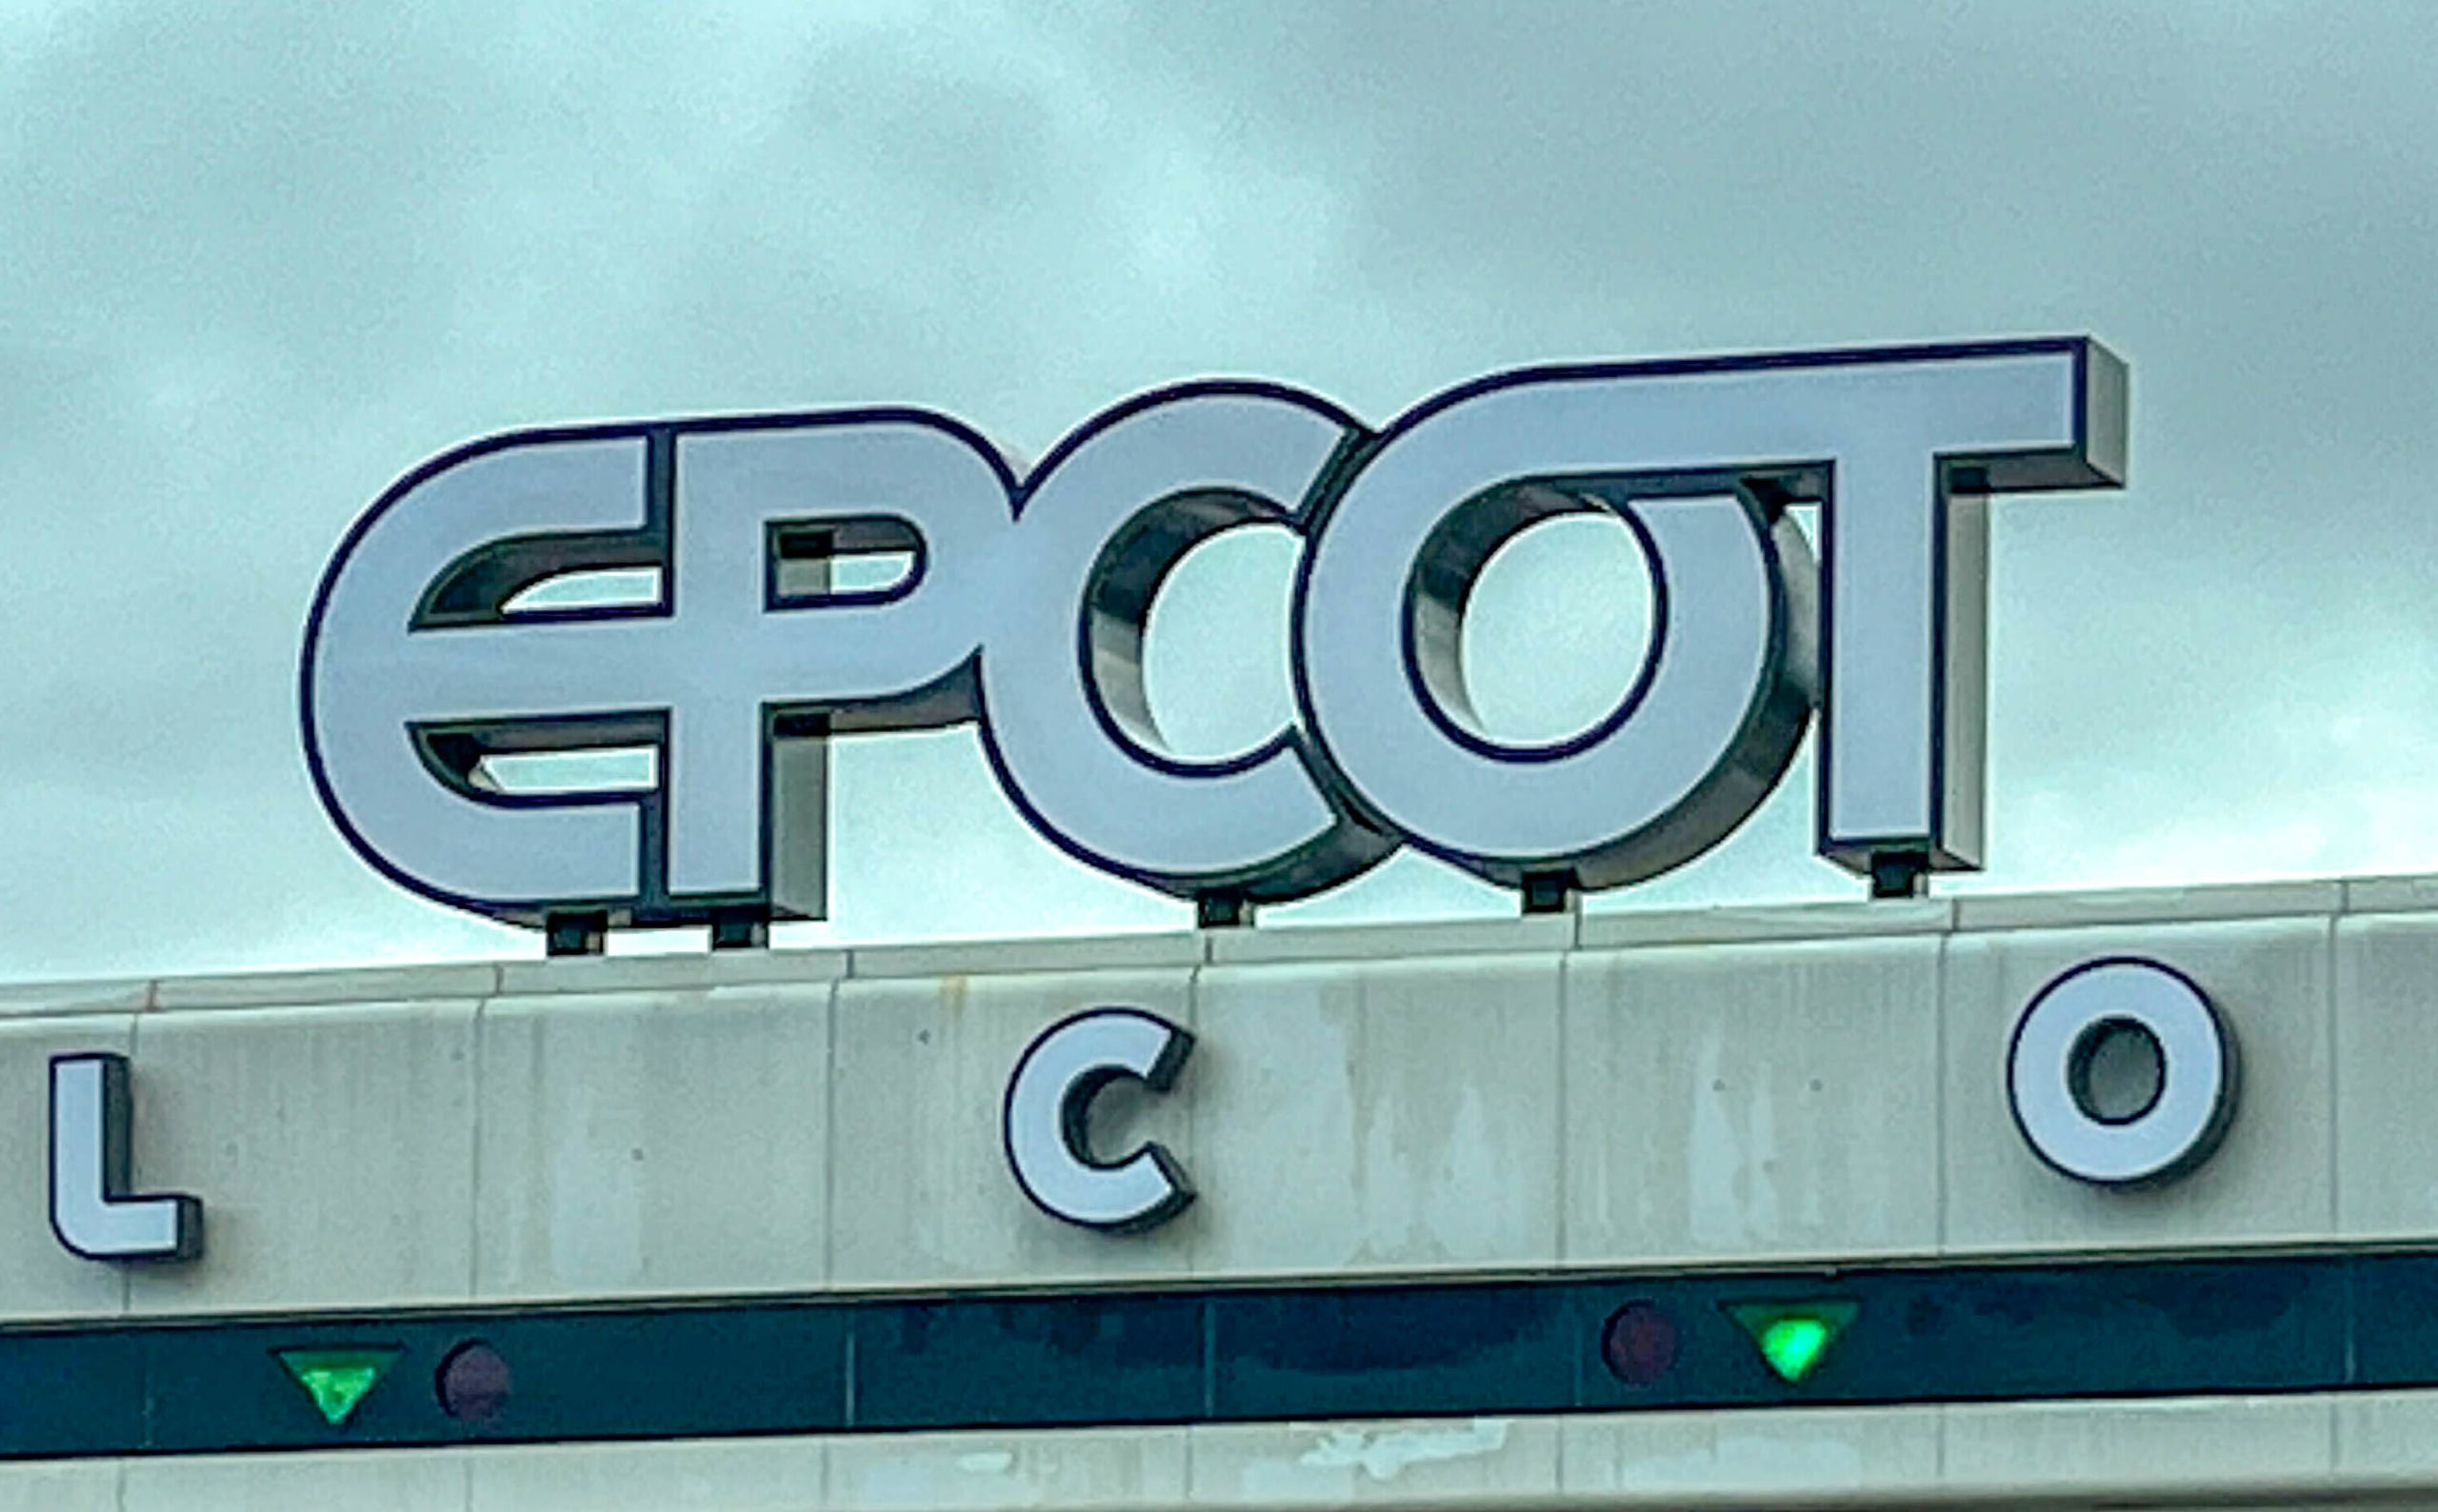 EPCOT has now been placed above "welcome"